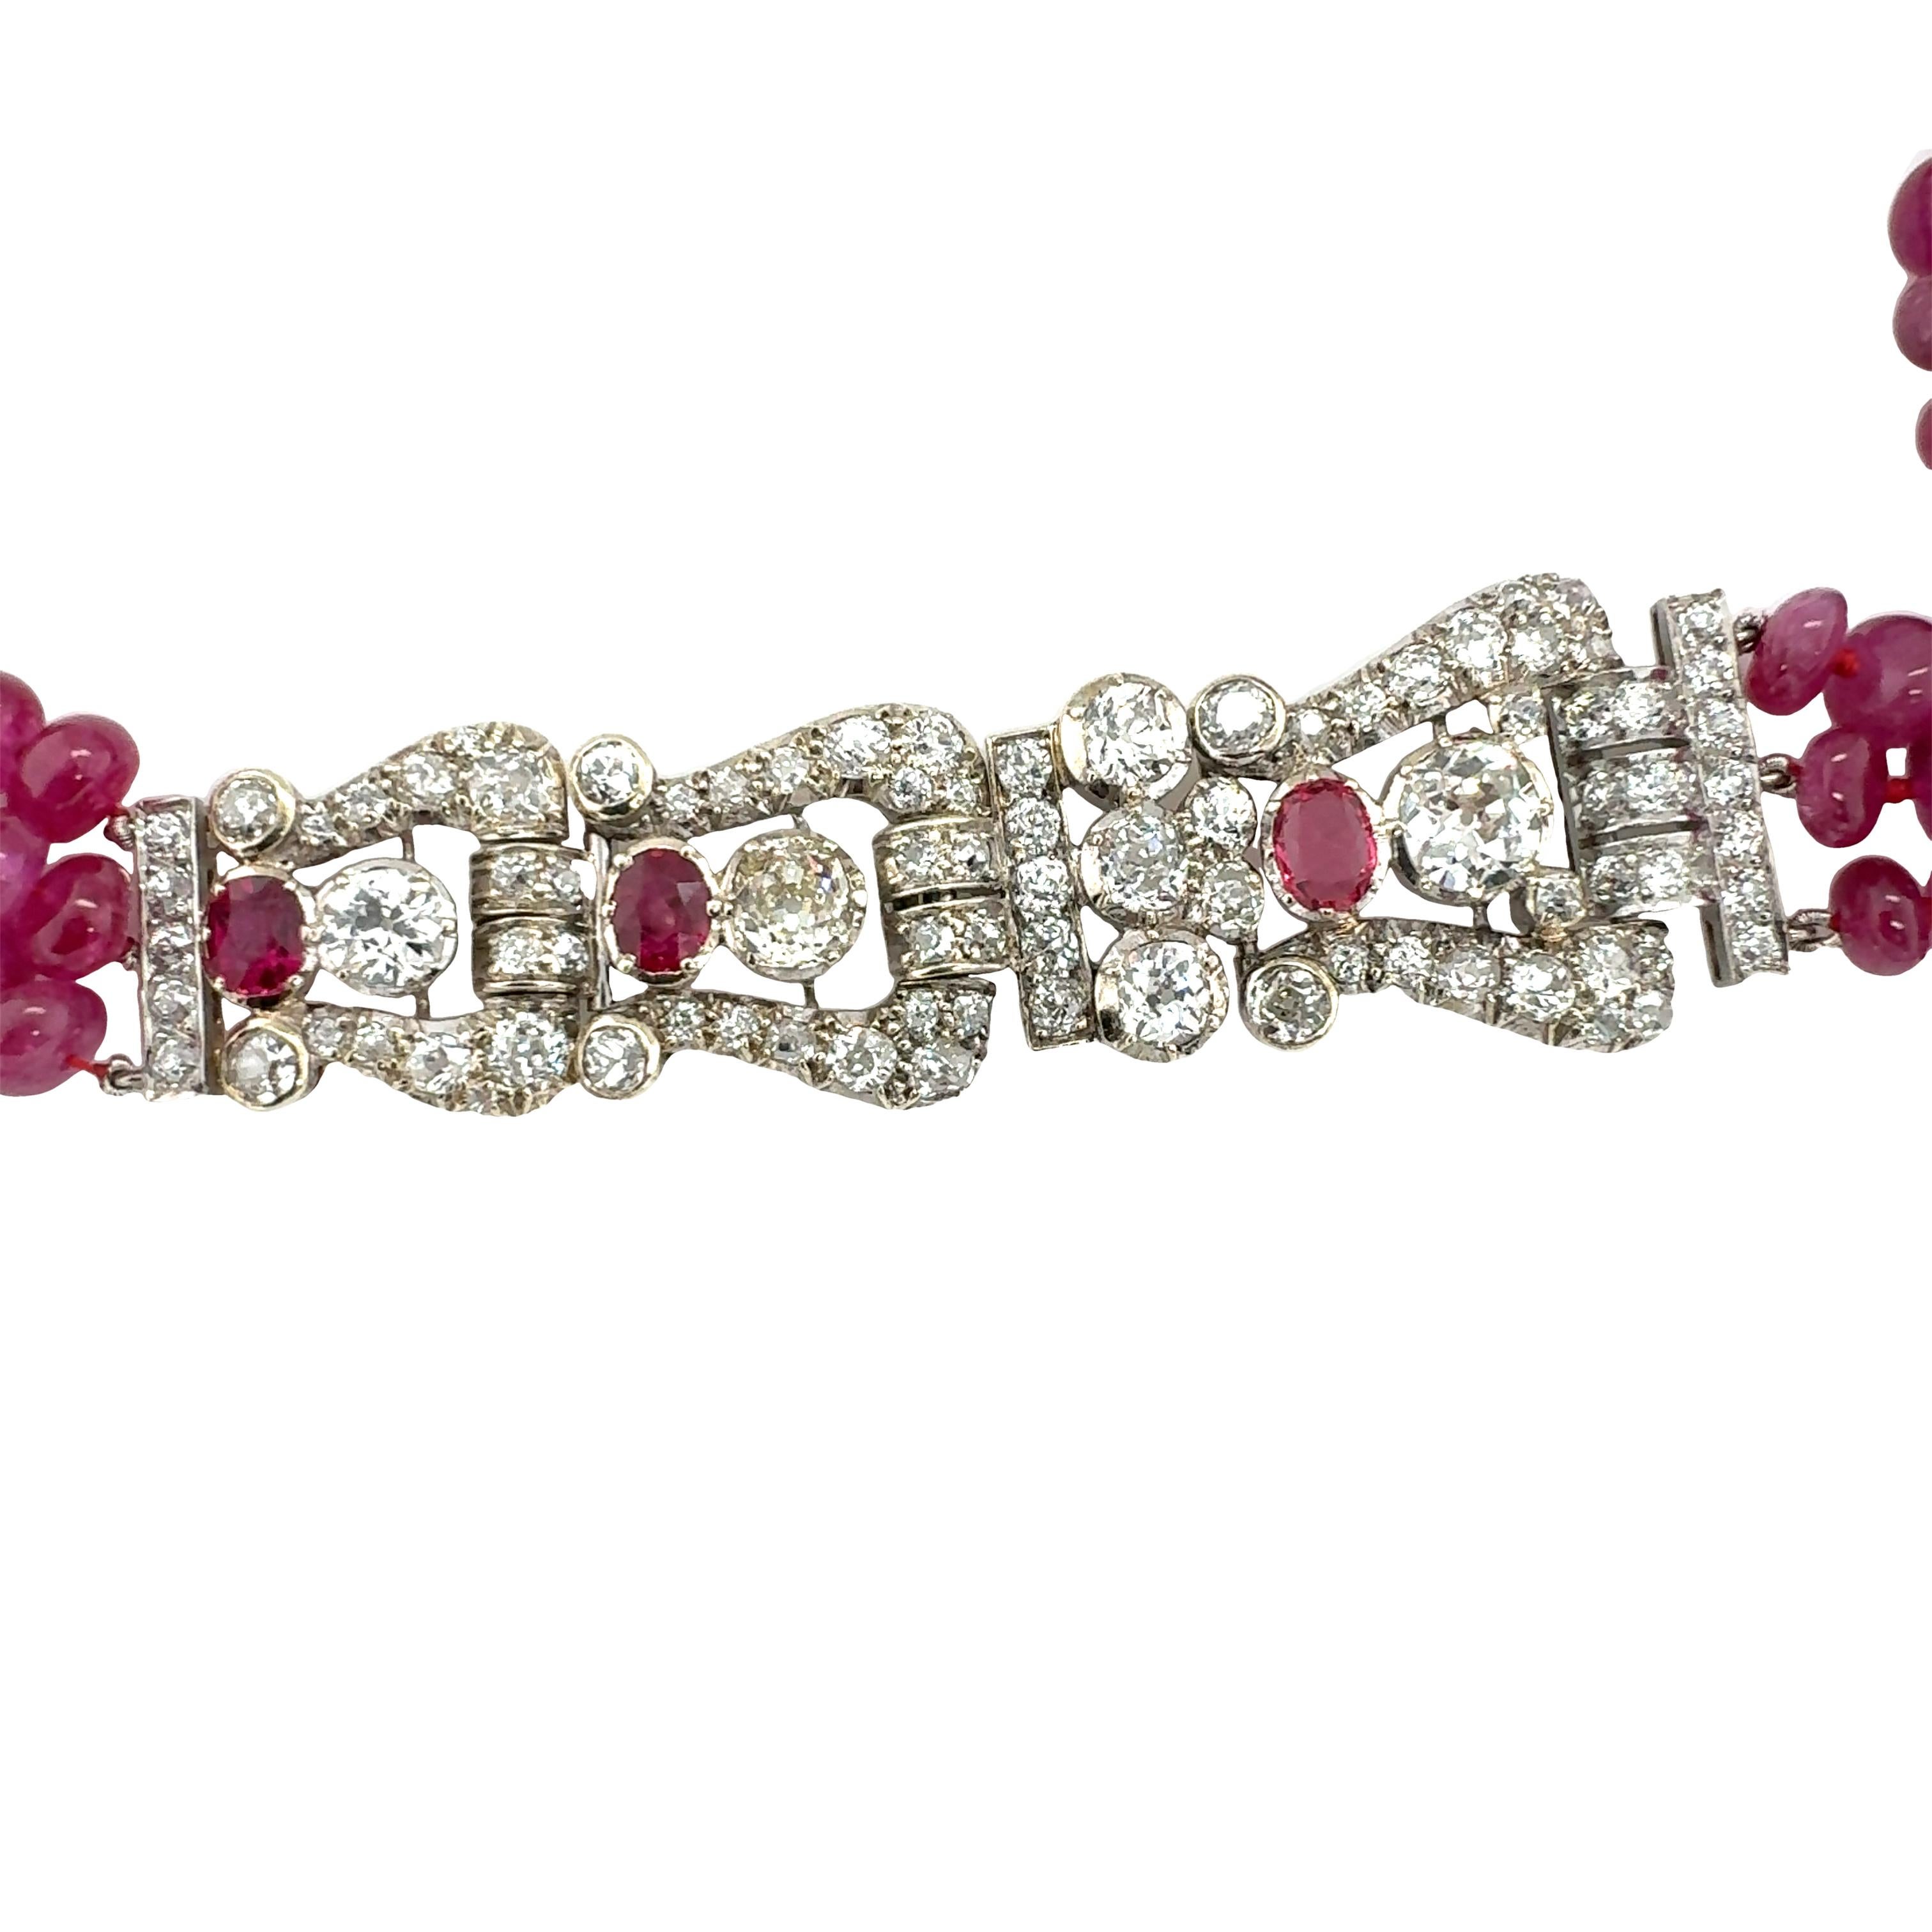 Art Deco Diamond and Ruby Bead Tassle Necklace by Tiffany & Co. For Sale